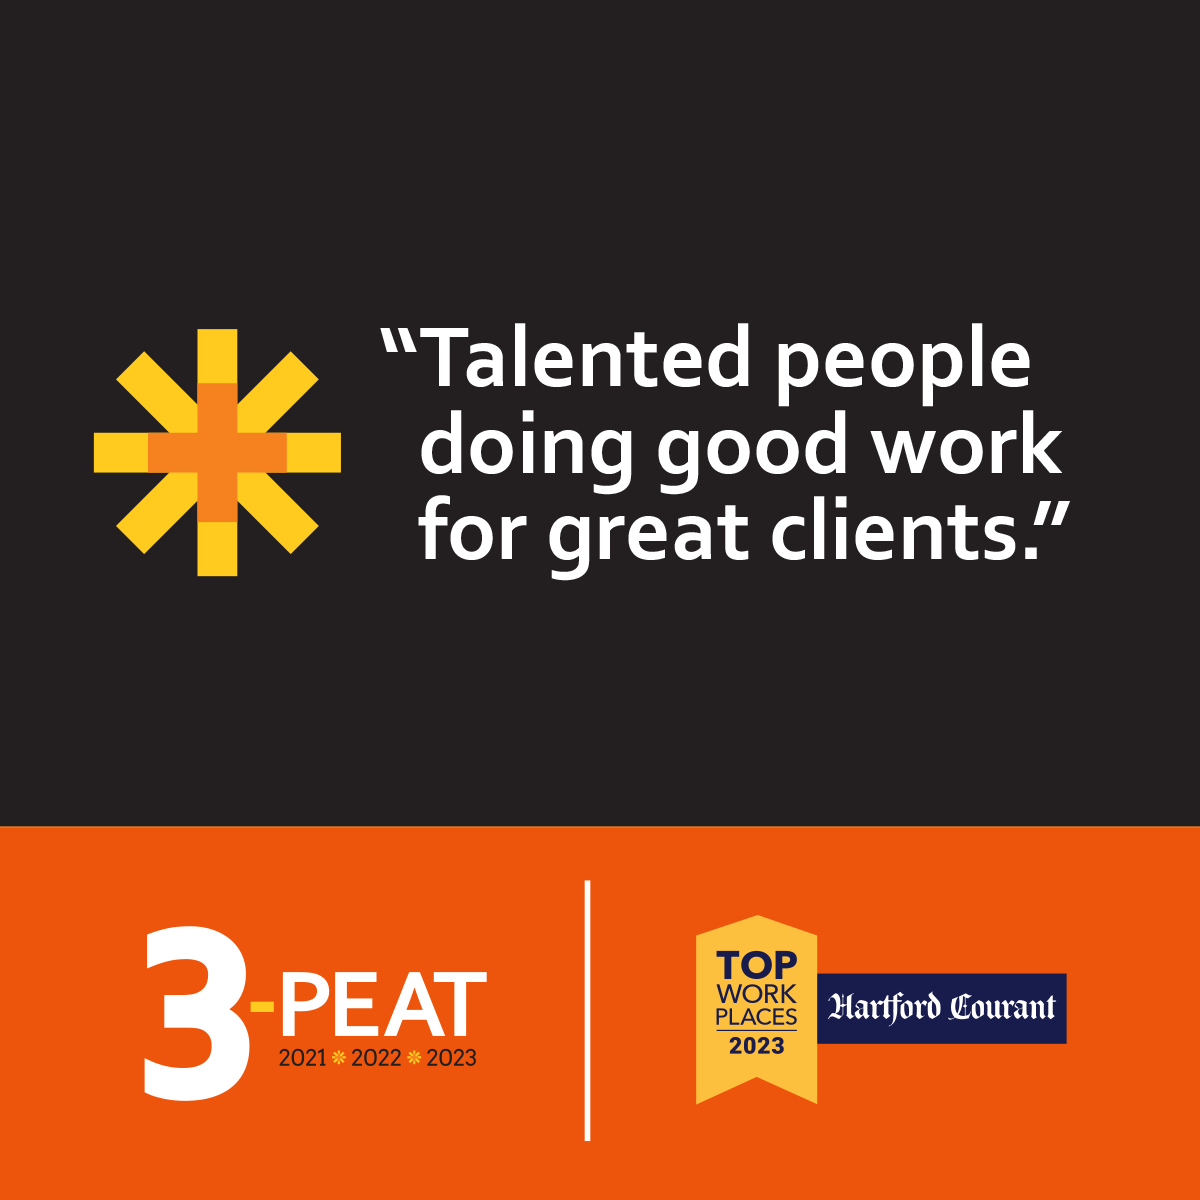 That’s just one of the things our employees say they like about working at Adams & Knight. So thankful for our amazing employees who build a positive culture here. So honored to have been recognized by the @hartfordcourant as a “Best Places to Work” for the 3rd year in a row!